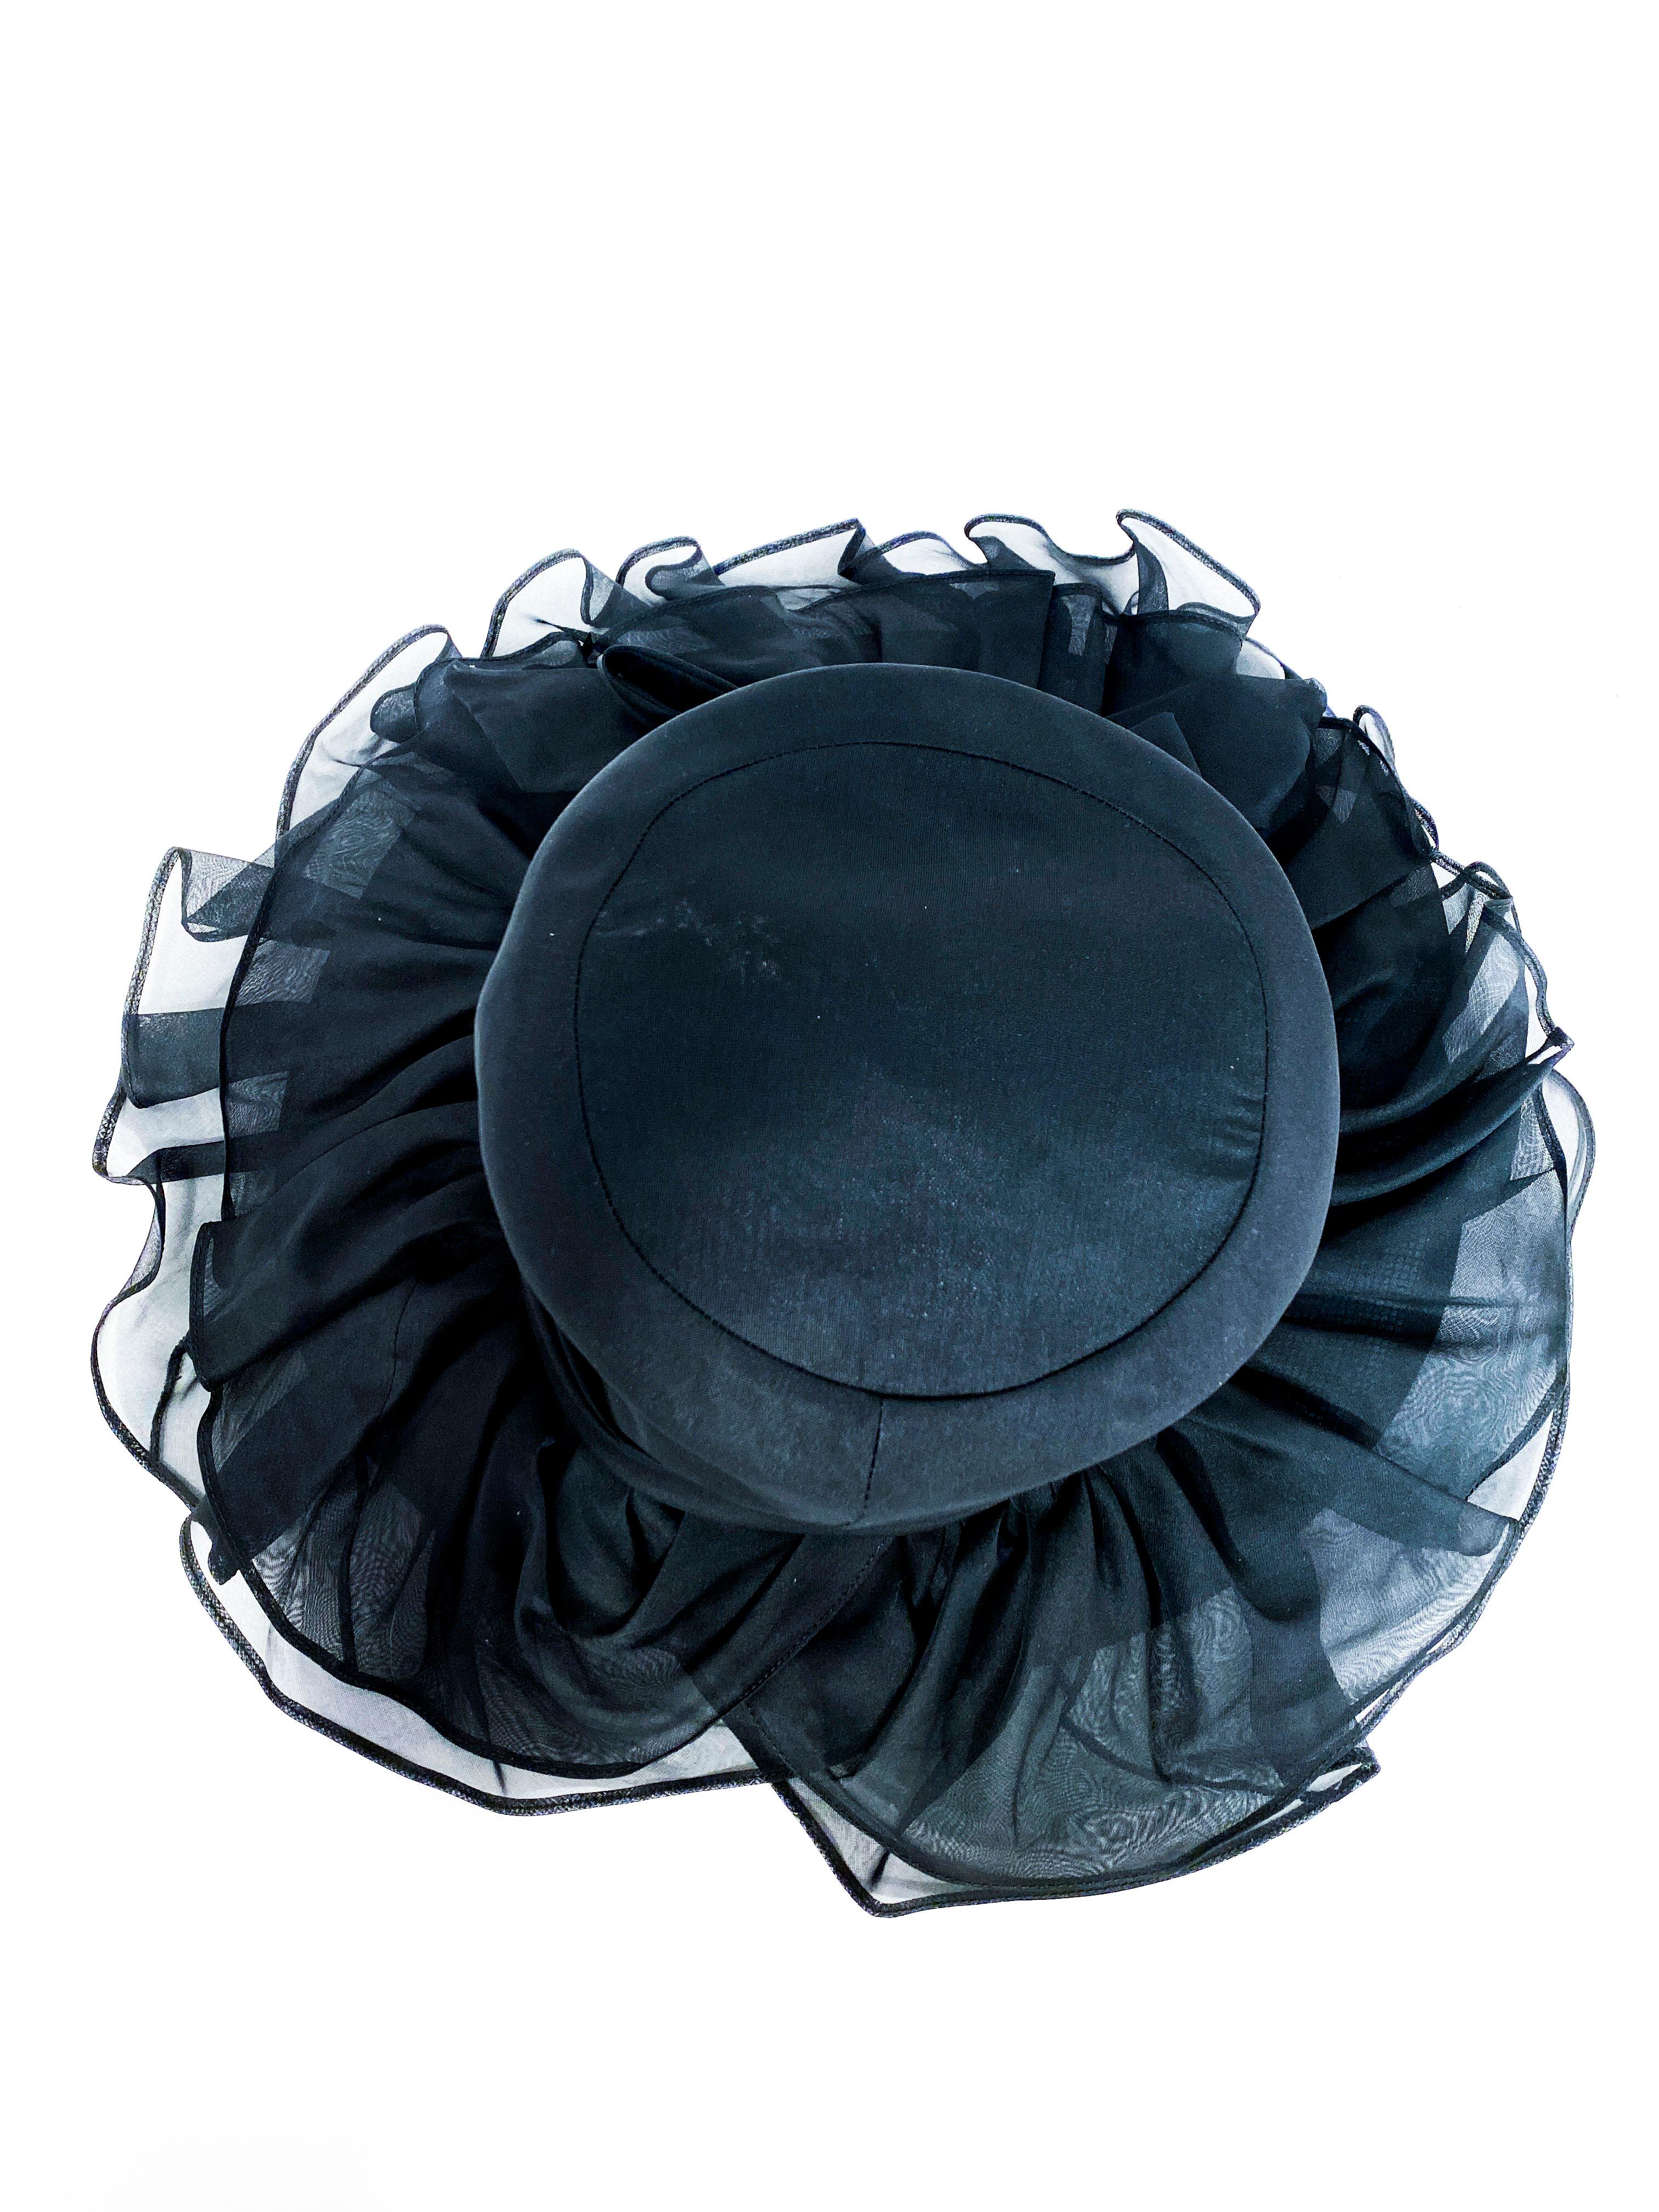 1960s/1970s Black Ruffled Wide Brimmed Hat 2